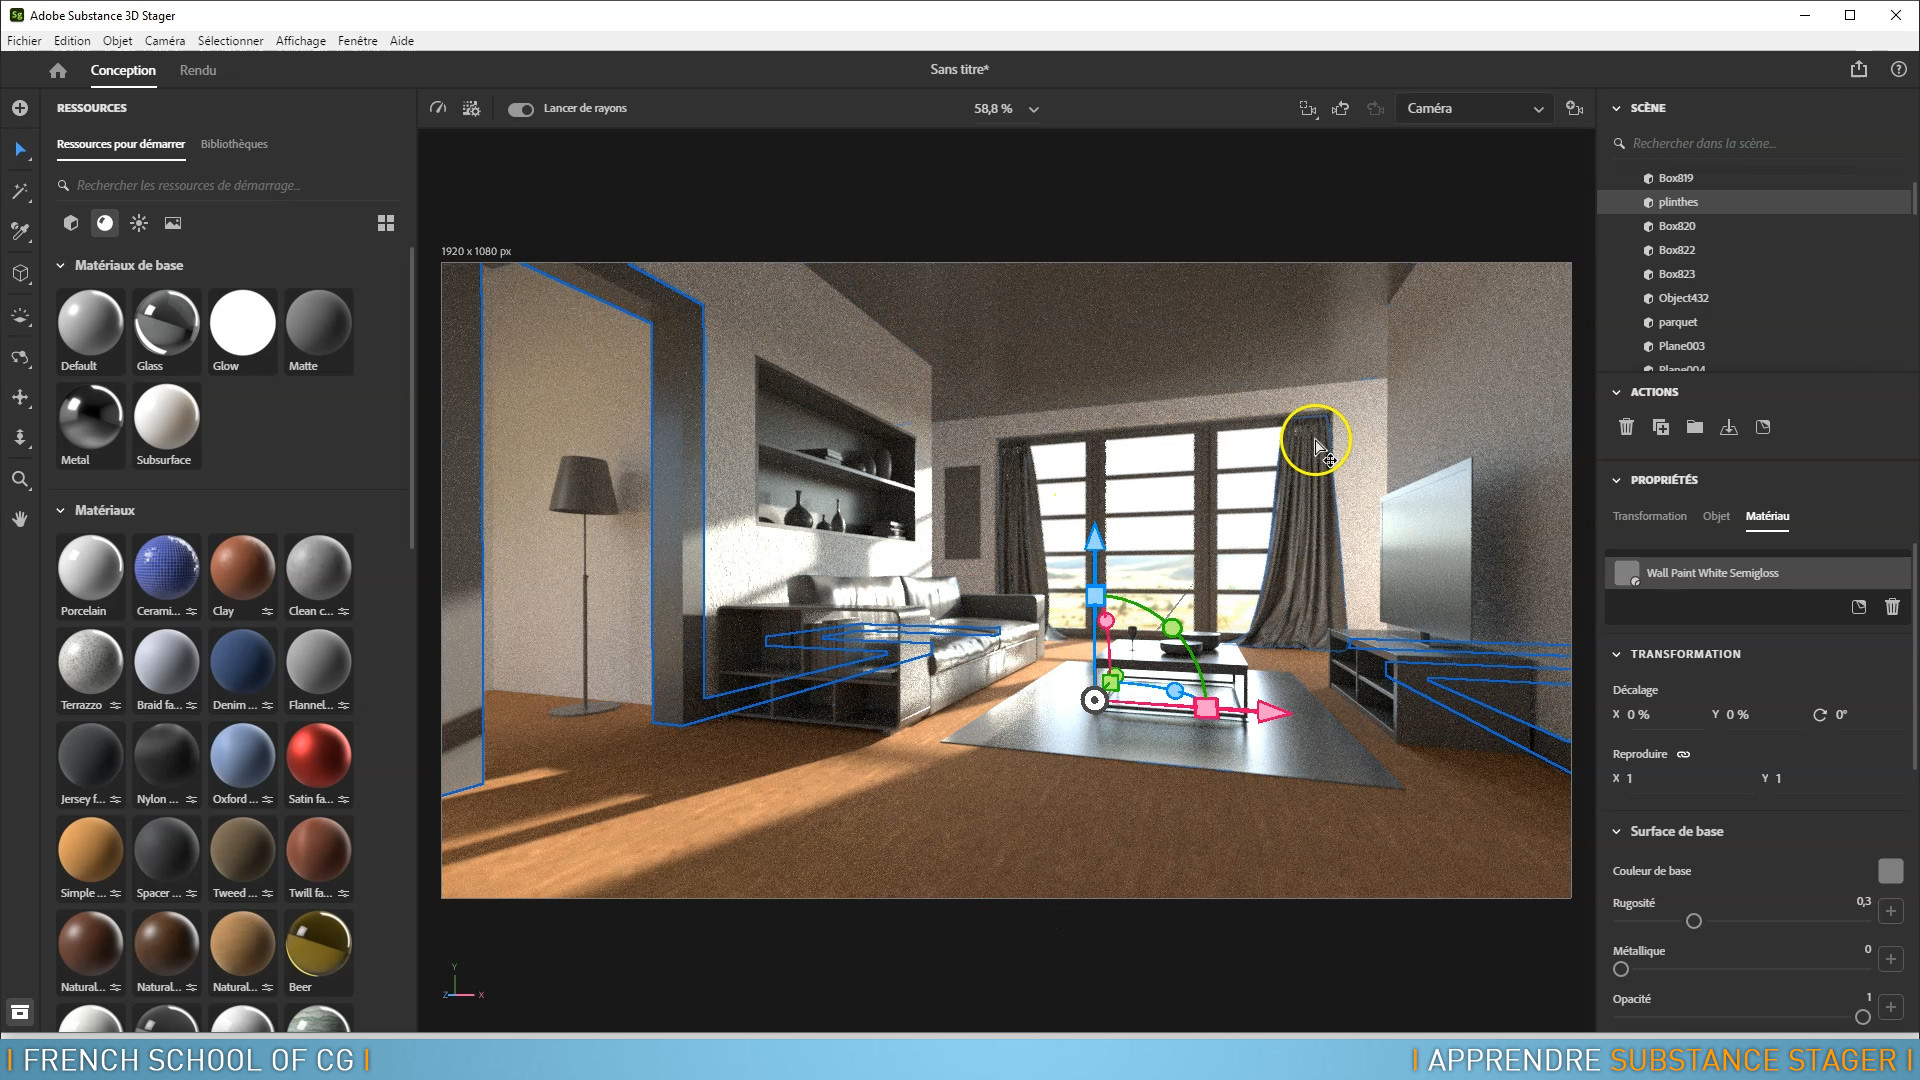 instal the last version for apple Adobe Substance 3D Stager 2.1.0.5587